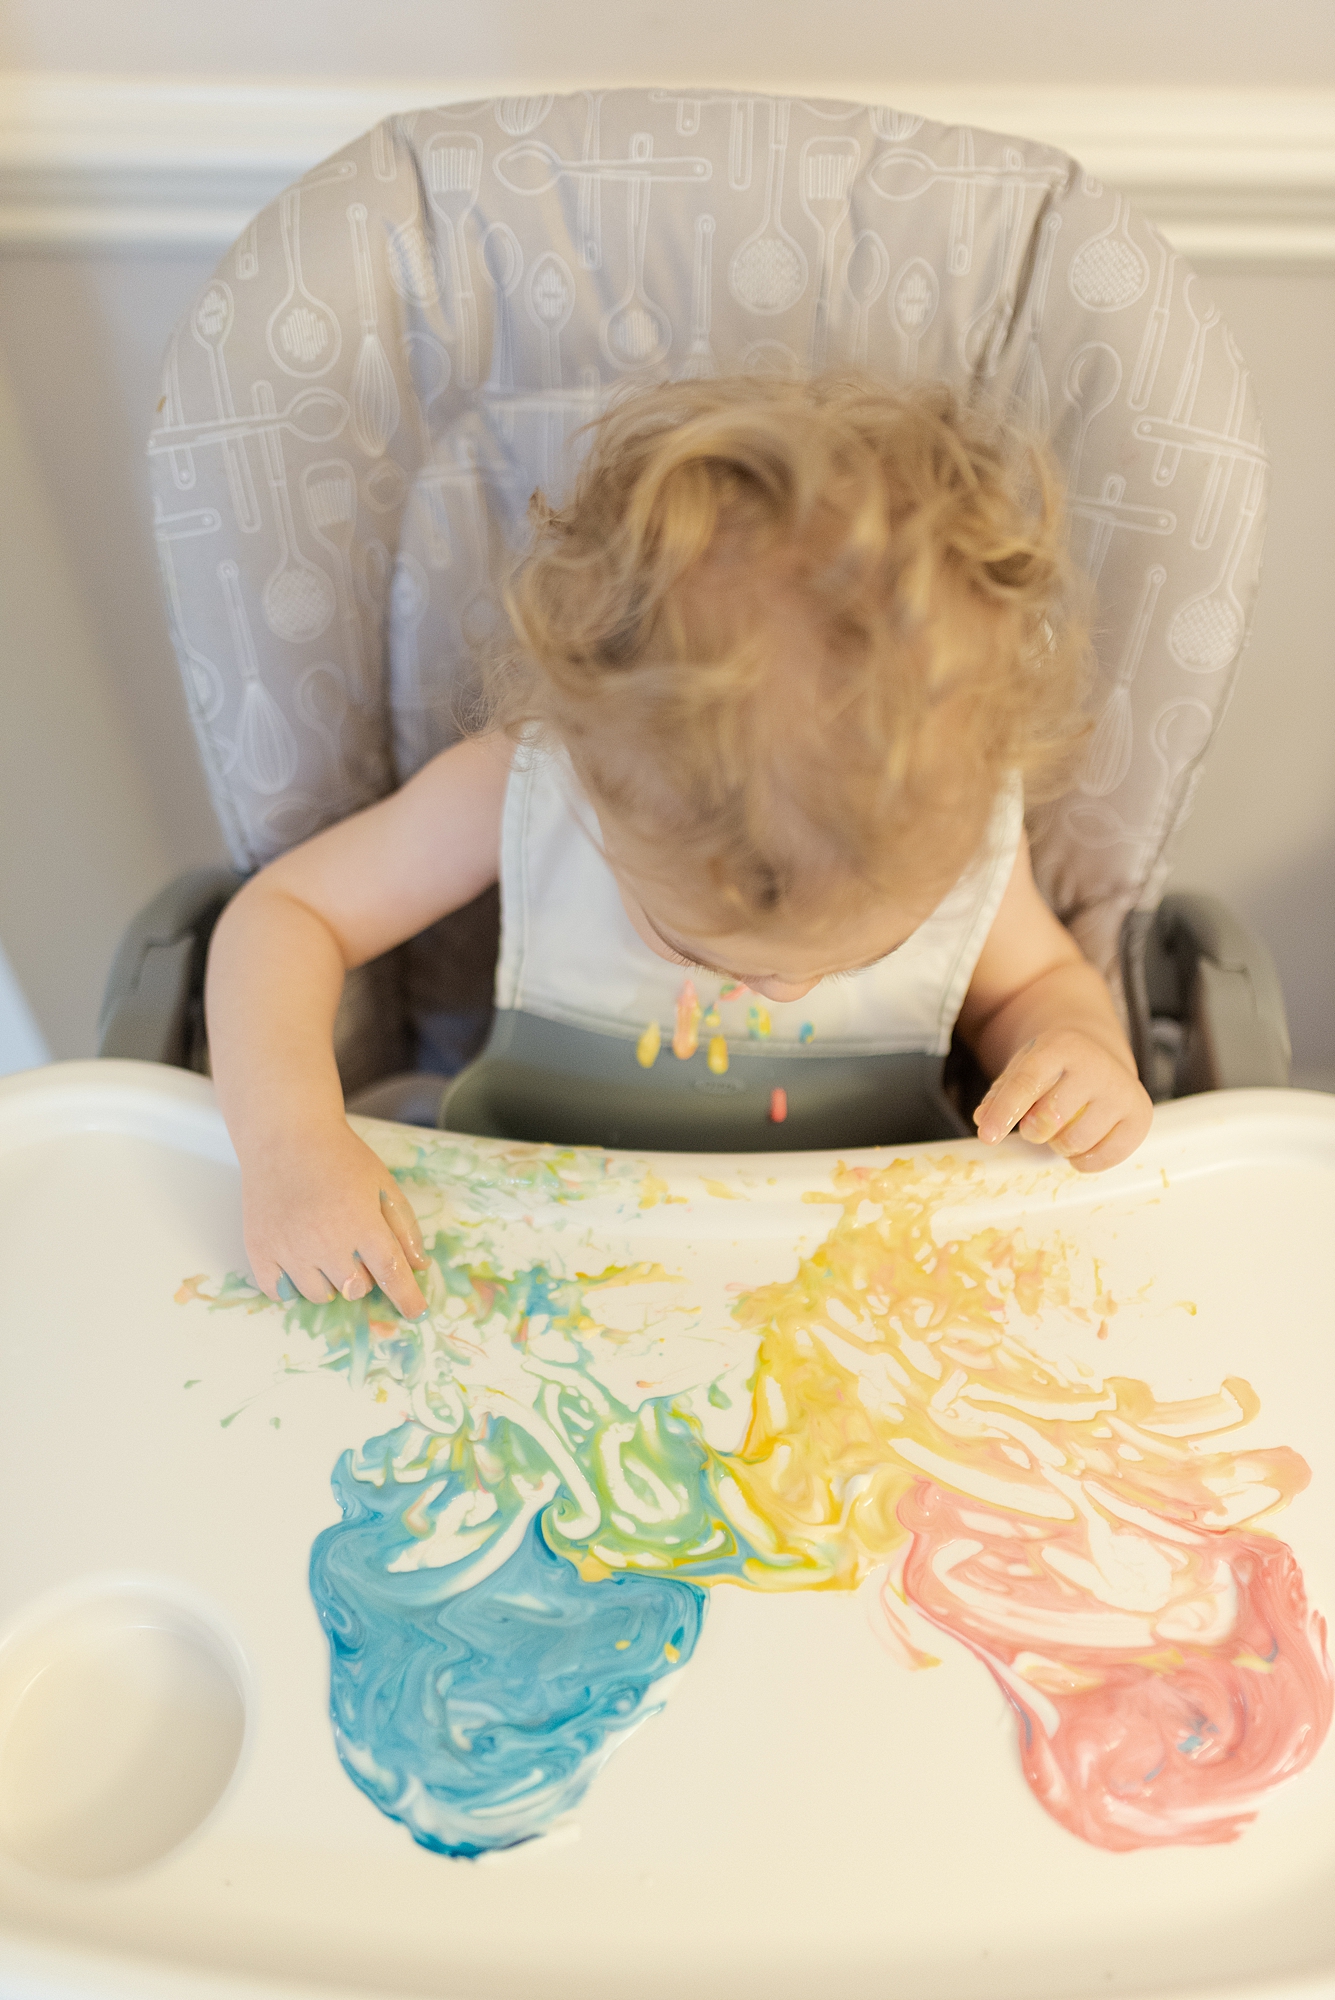 Nashville Family Photographer Dolly DeLong Photography Shares an Easy At Home Art Project You can do with your toddler